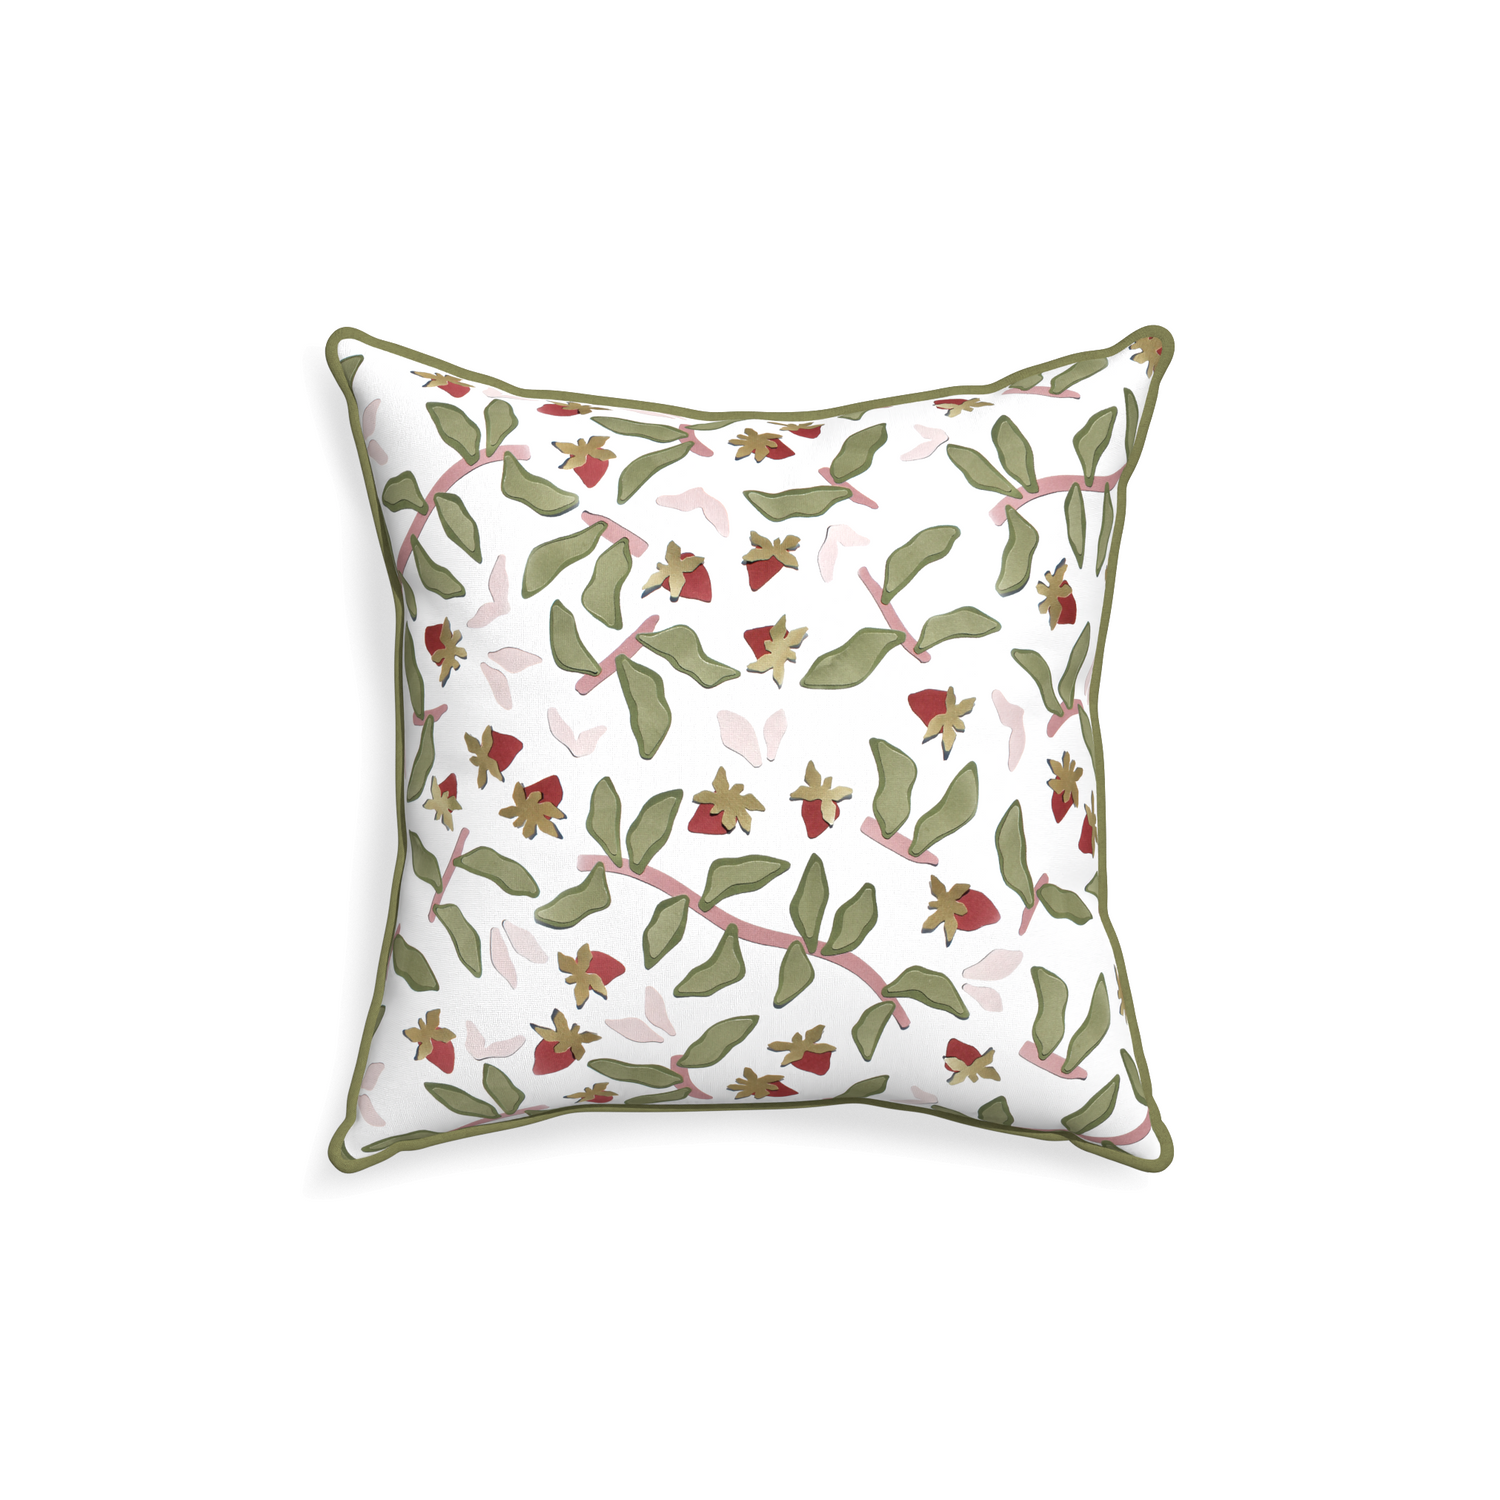 18-square nellie custom strawberry & botanicalpillow with moss piping on white background